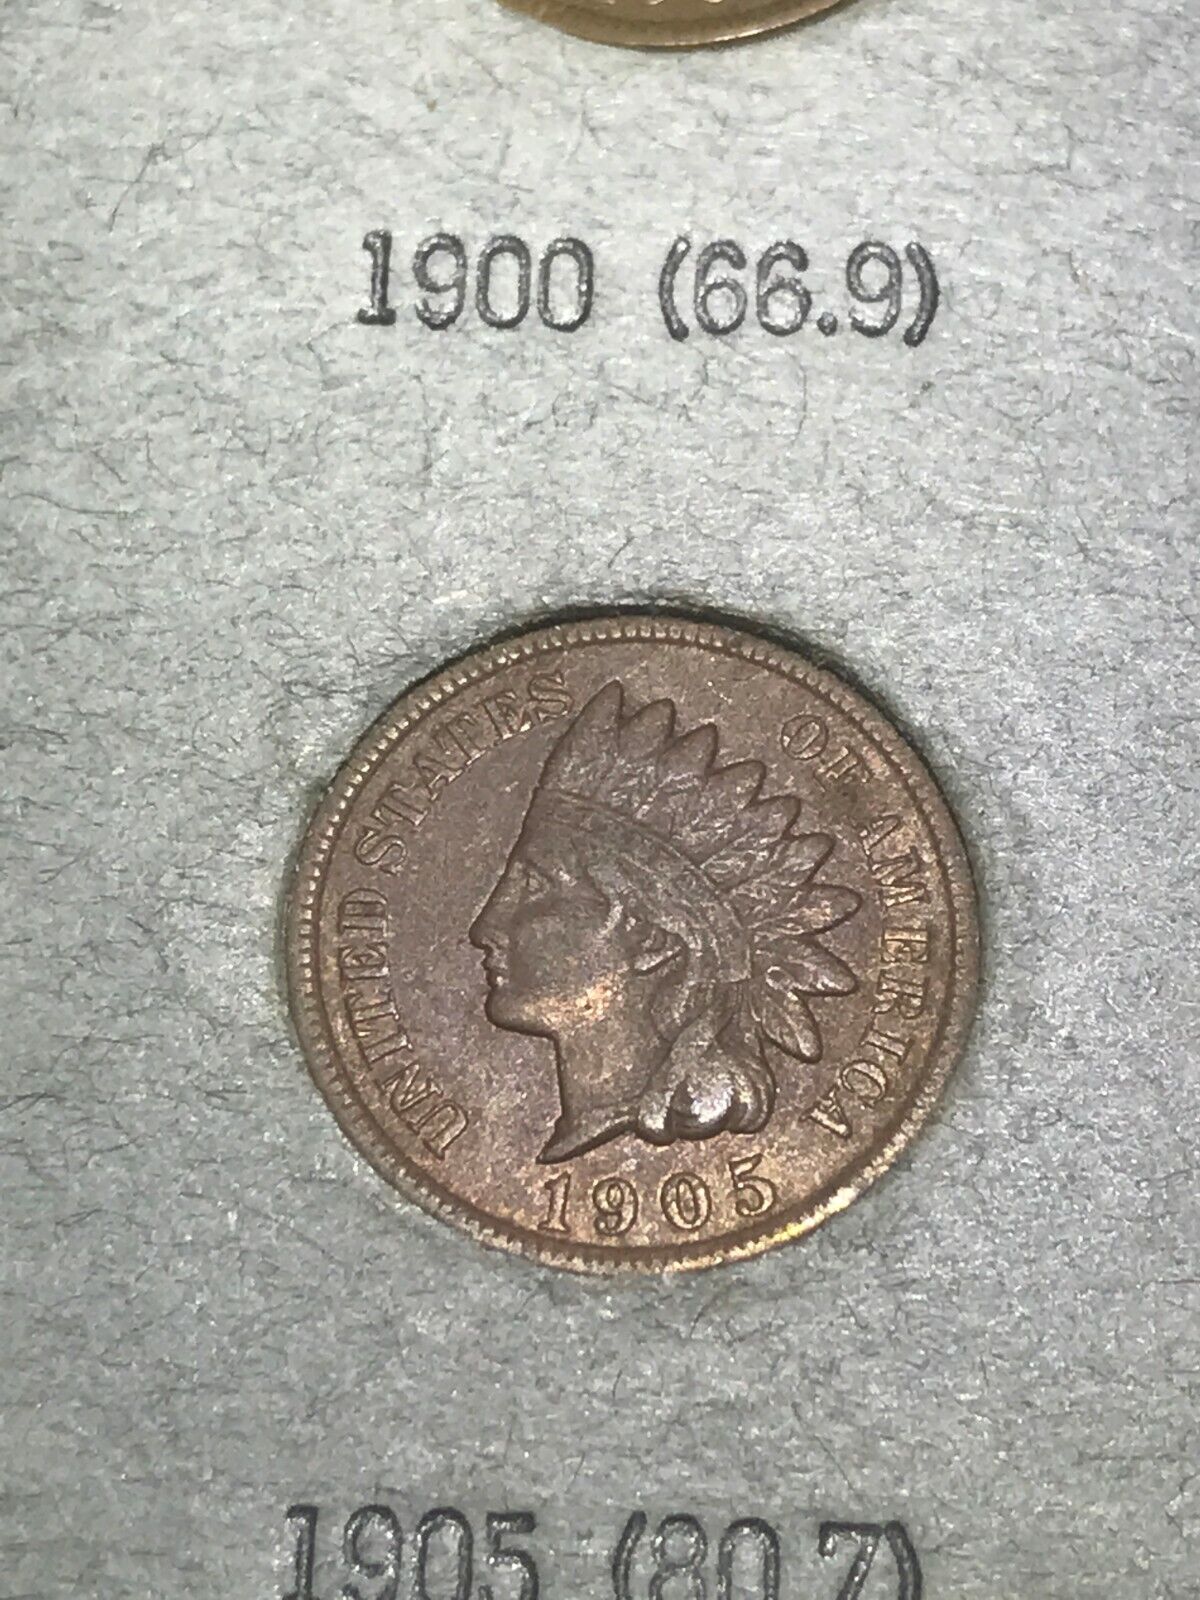 34 DIFFERENT INDIAN HEAD PENNIES + 1 FLYING EAGLE